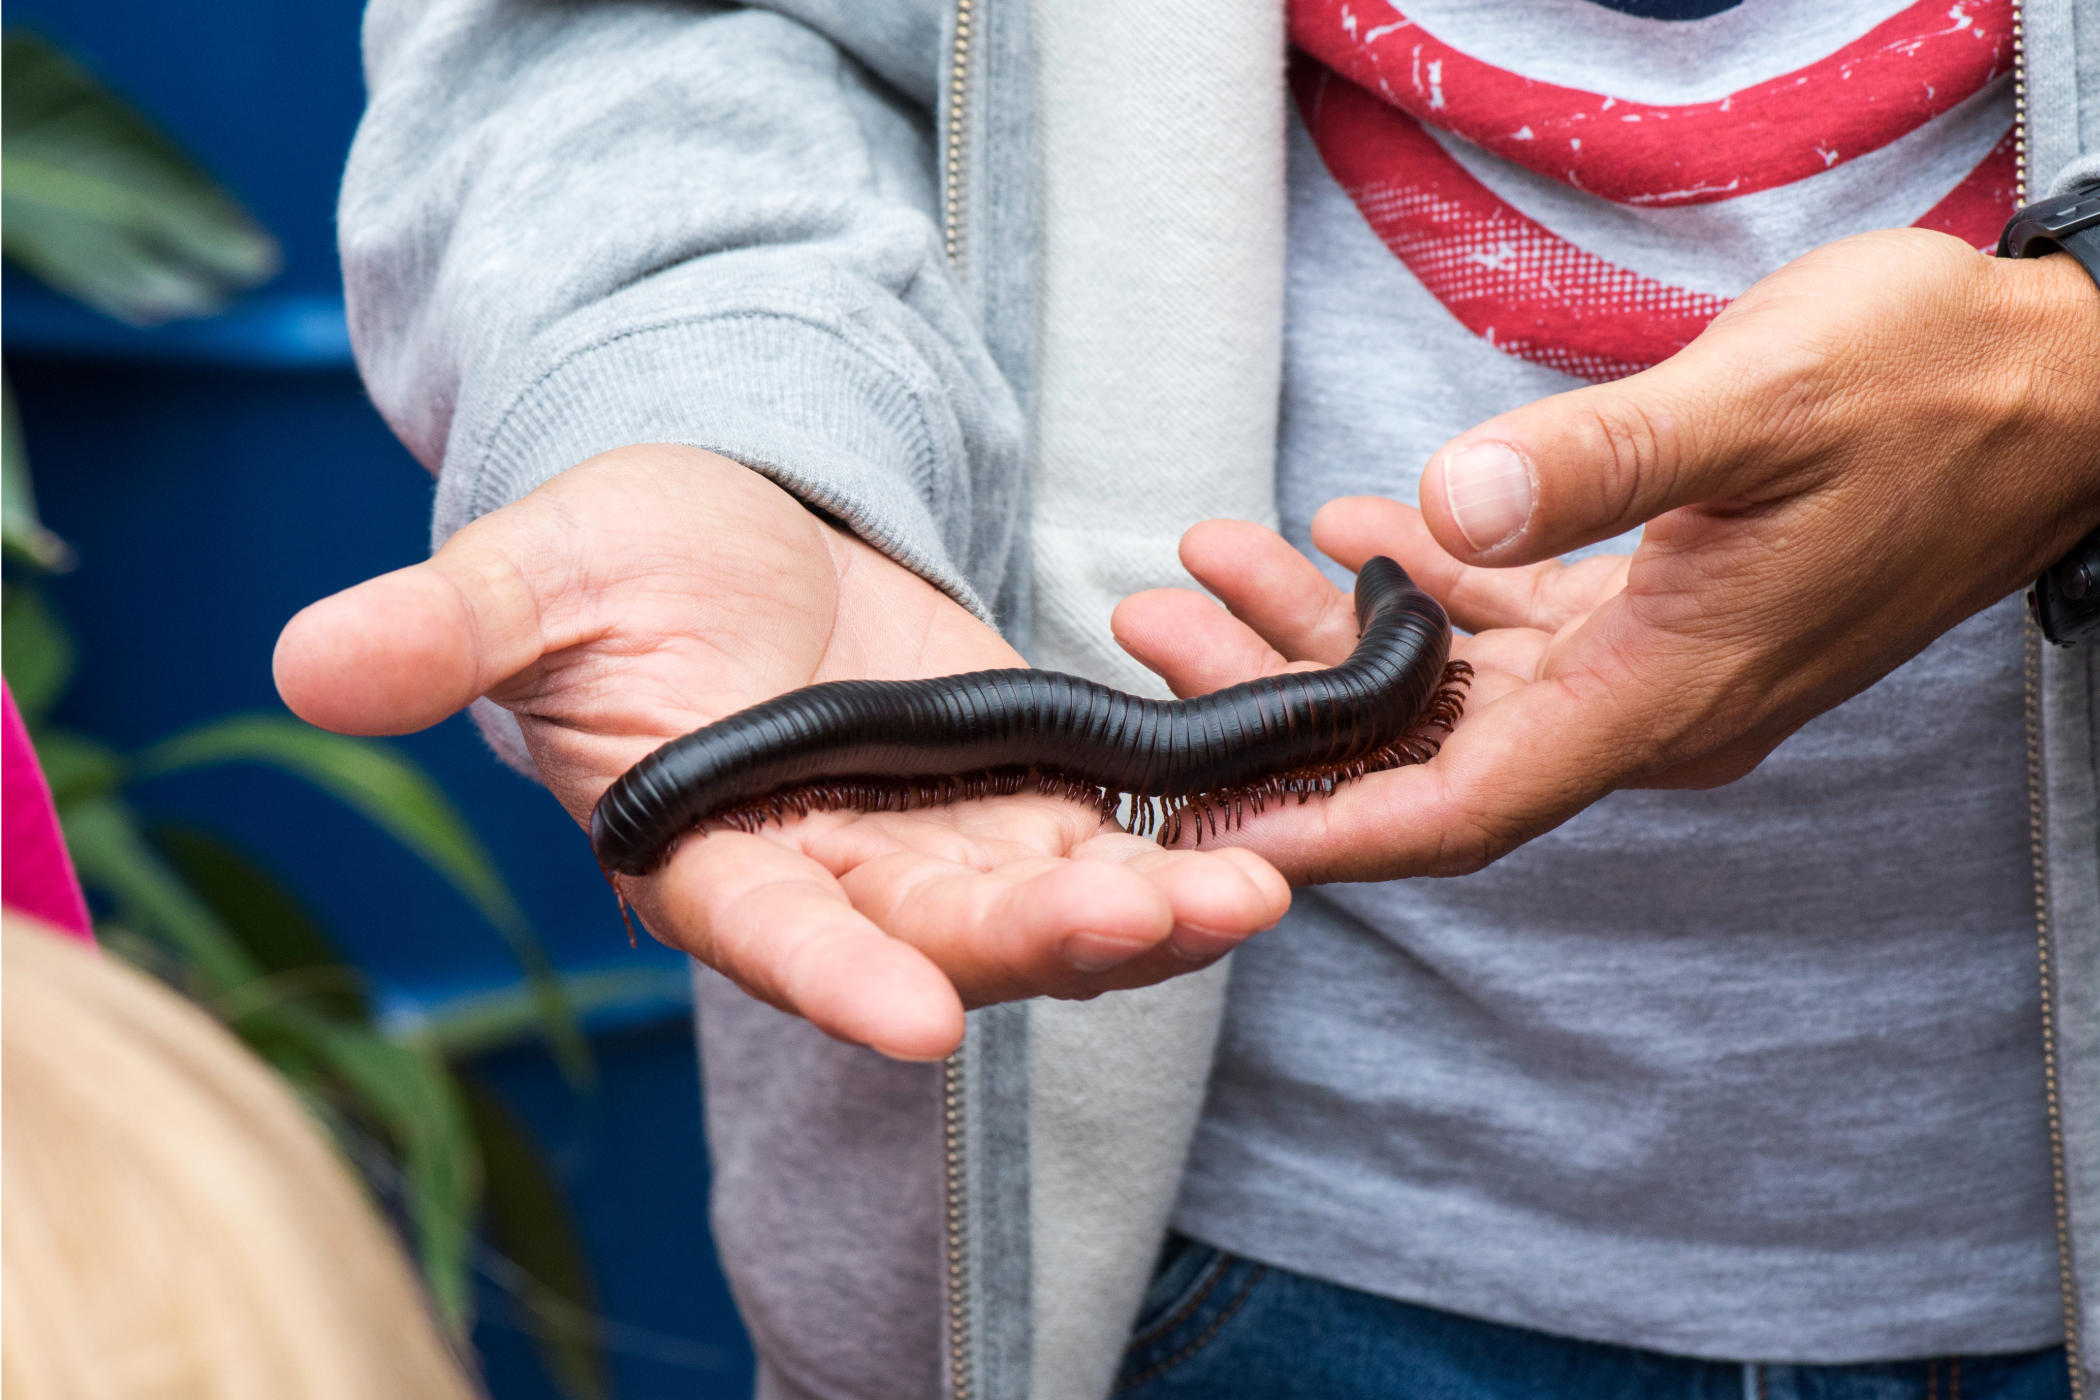 A giant African millipede in someone's hands.